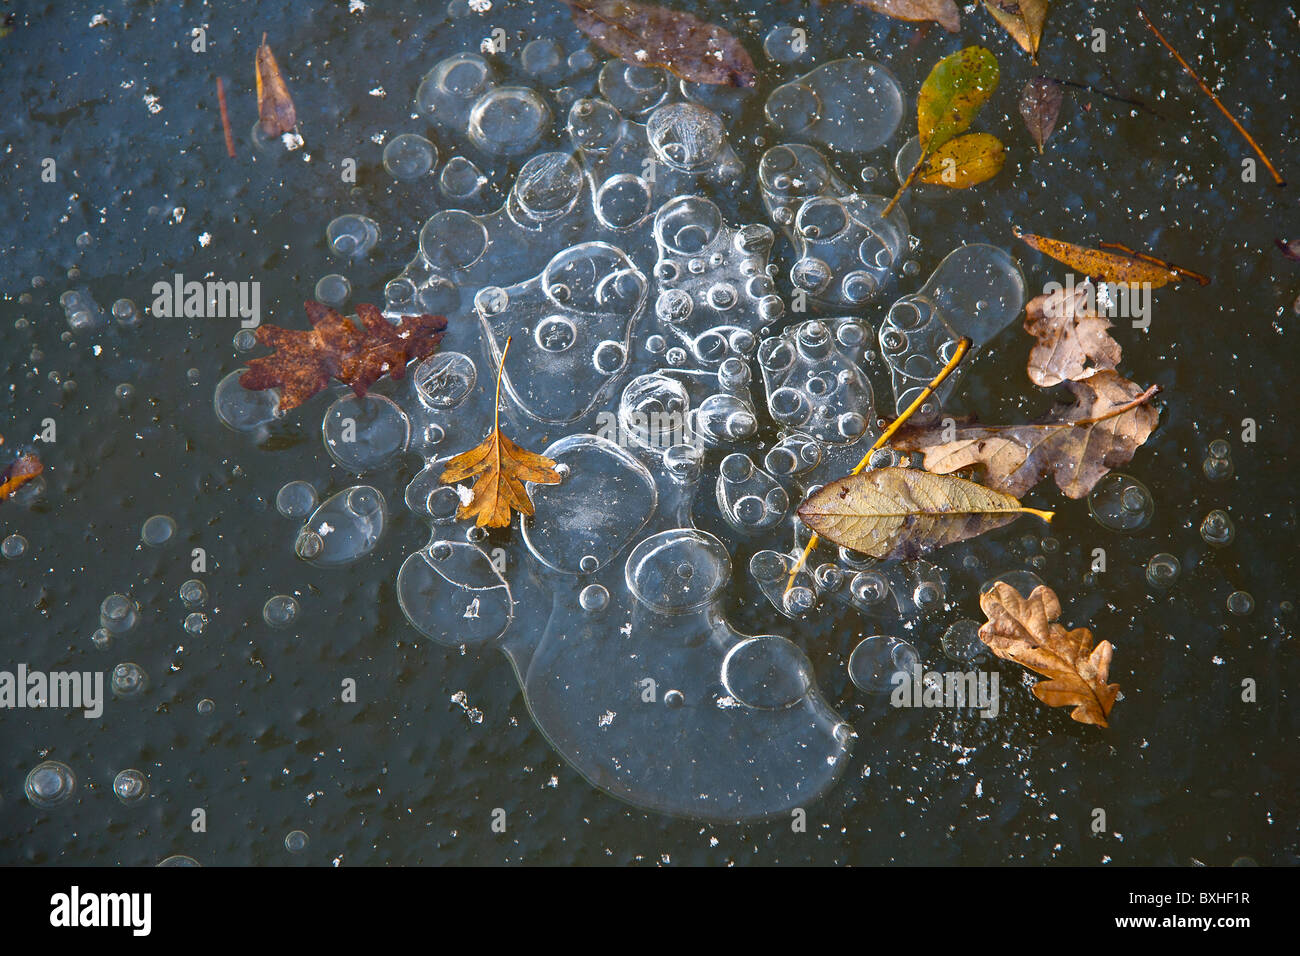 Methane gas bubbles trapped below the surface of a frozen stagnant pond. Stock Photo